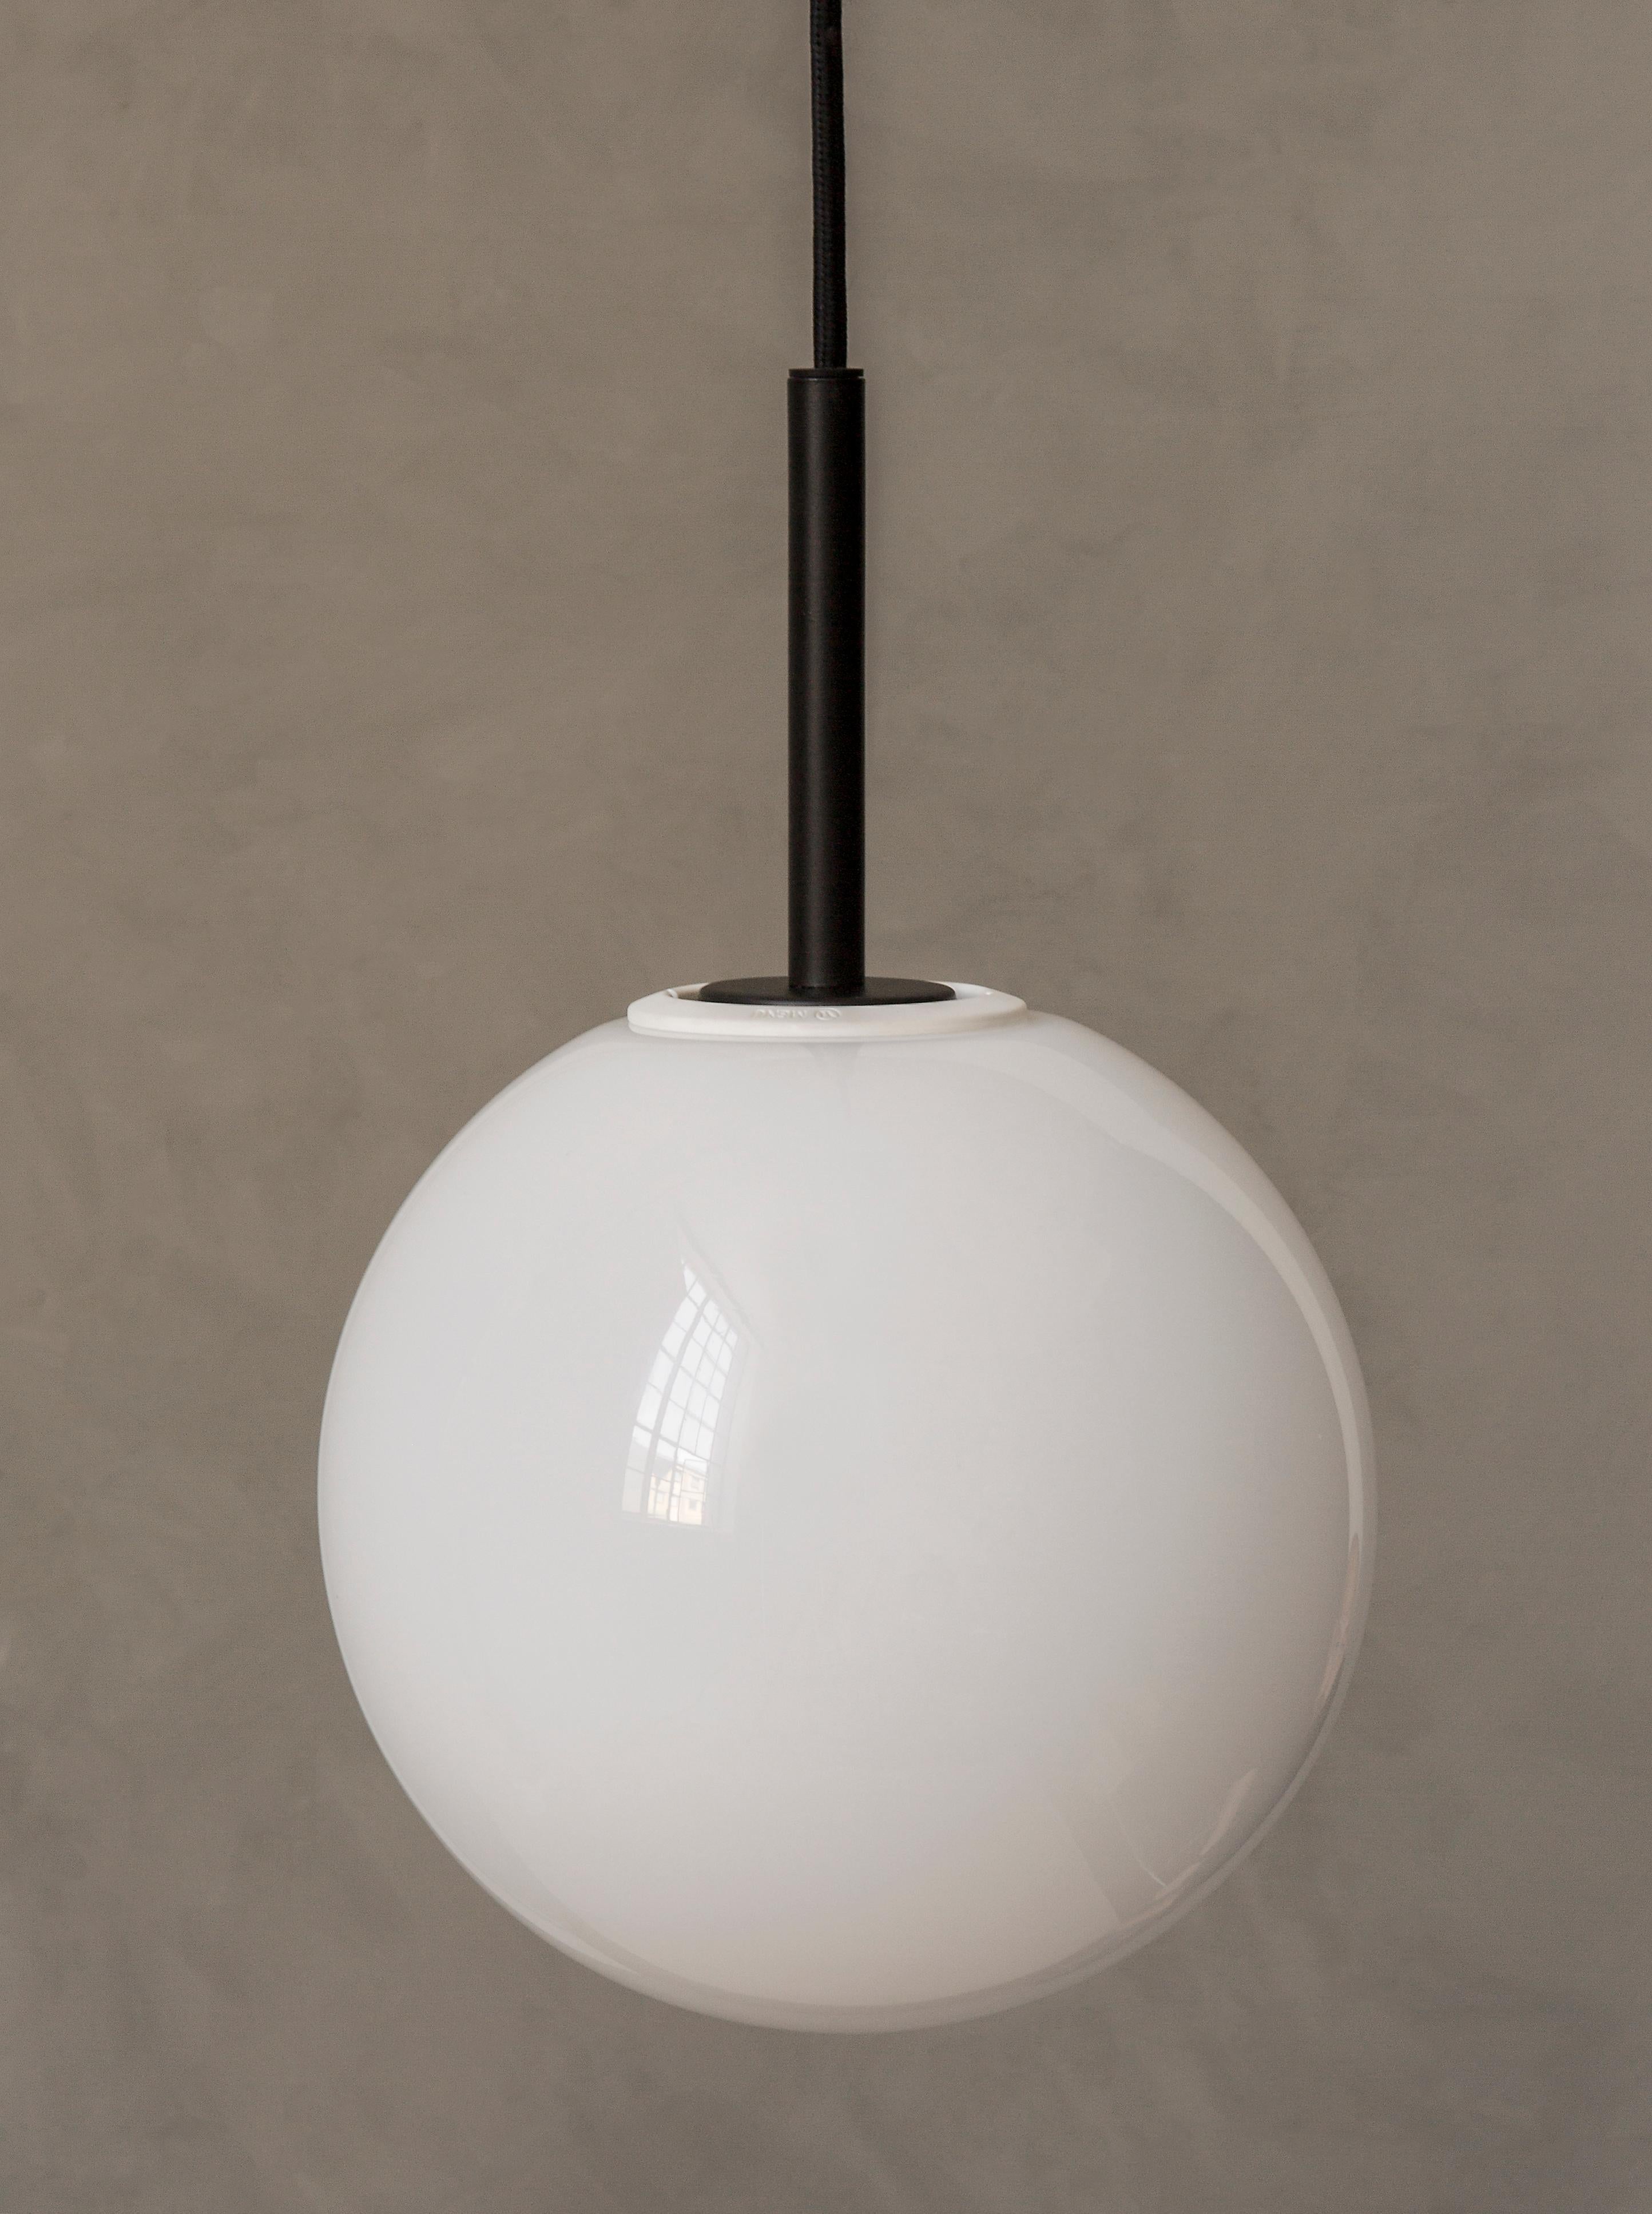 Designed for longevity, TR bulb uses LED technology, which, with normal use, should last many years. The globe is constructed from white opal glass, and the core structure is made from aluminium to draw heat away from the LED, allowing the bulb to